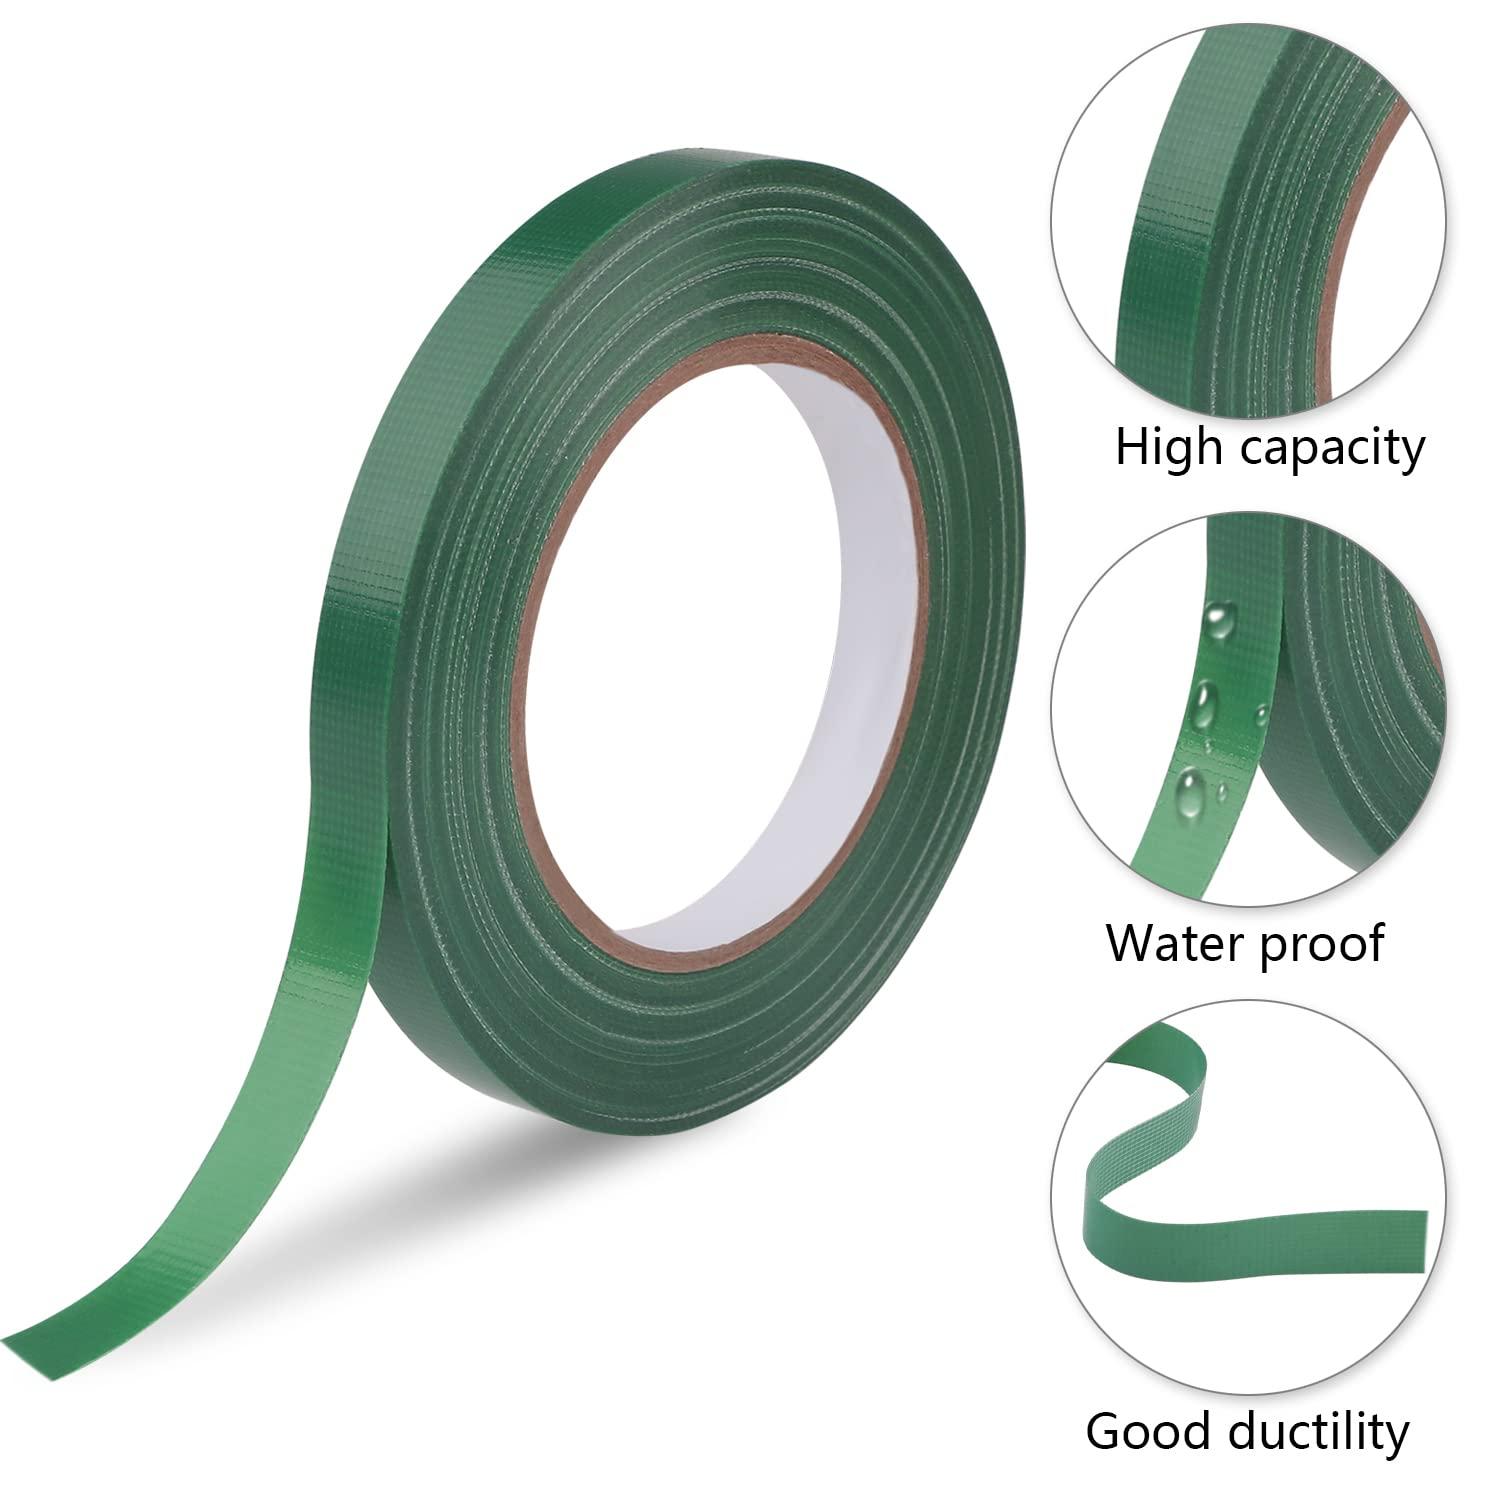 Floral Tape Green, Flower Wrap Adhesive Waterproof Tape for Bouquets 0.25  (60 Yd/180 Ft) - 1 Roll